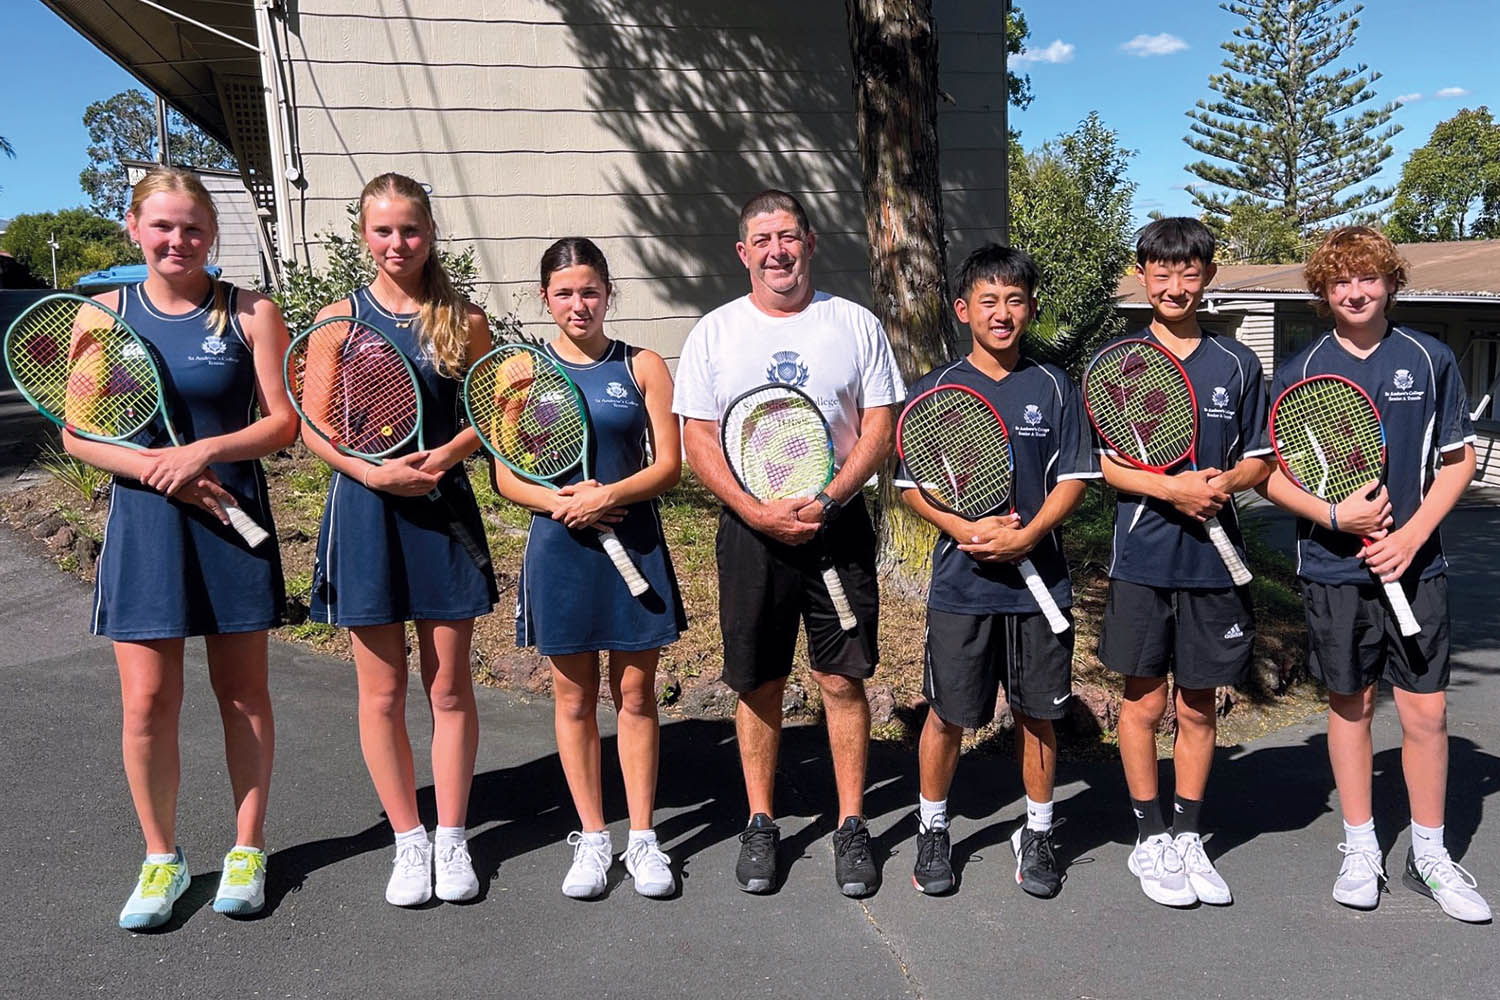 St Andrew's College Senior Mixed tennis team at the New Zealand Secondary Schools' Tennis Championships.